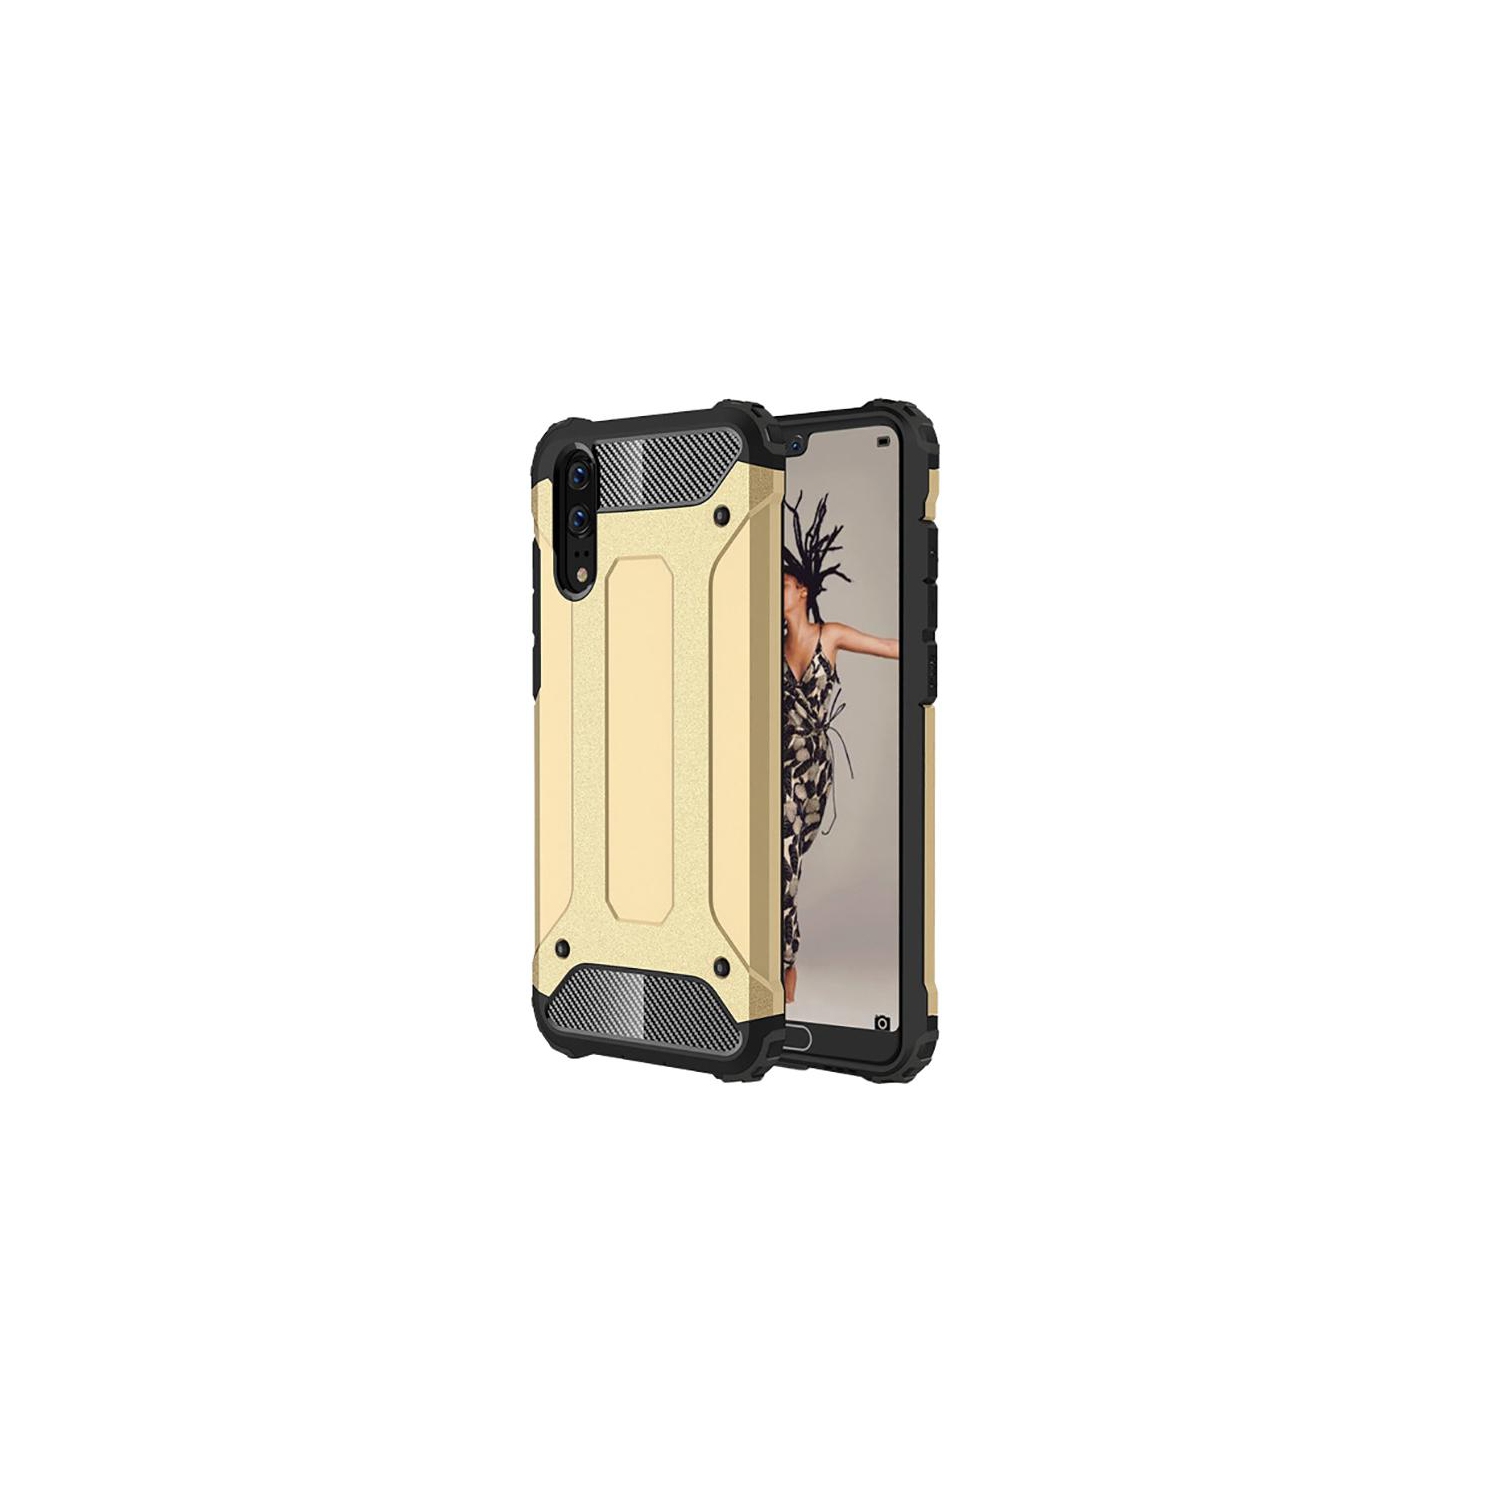 PANDACO Golden Armour Case for Huawei P20